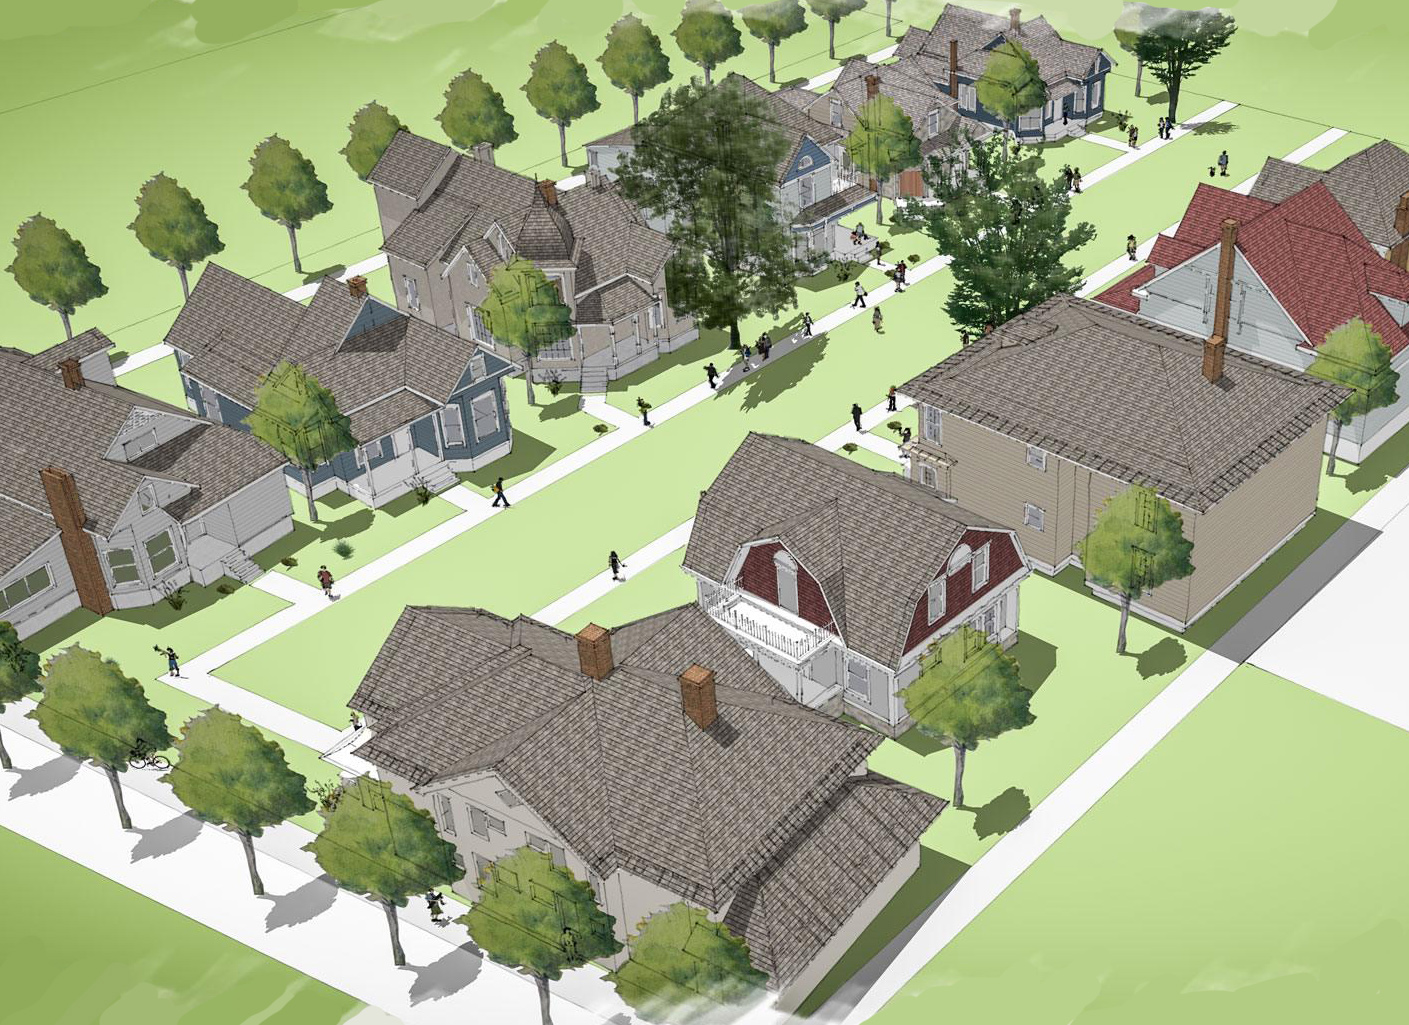 Overhead view of the historic homes with a proposed layout